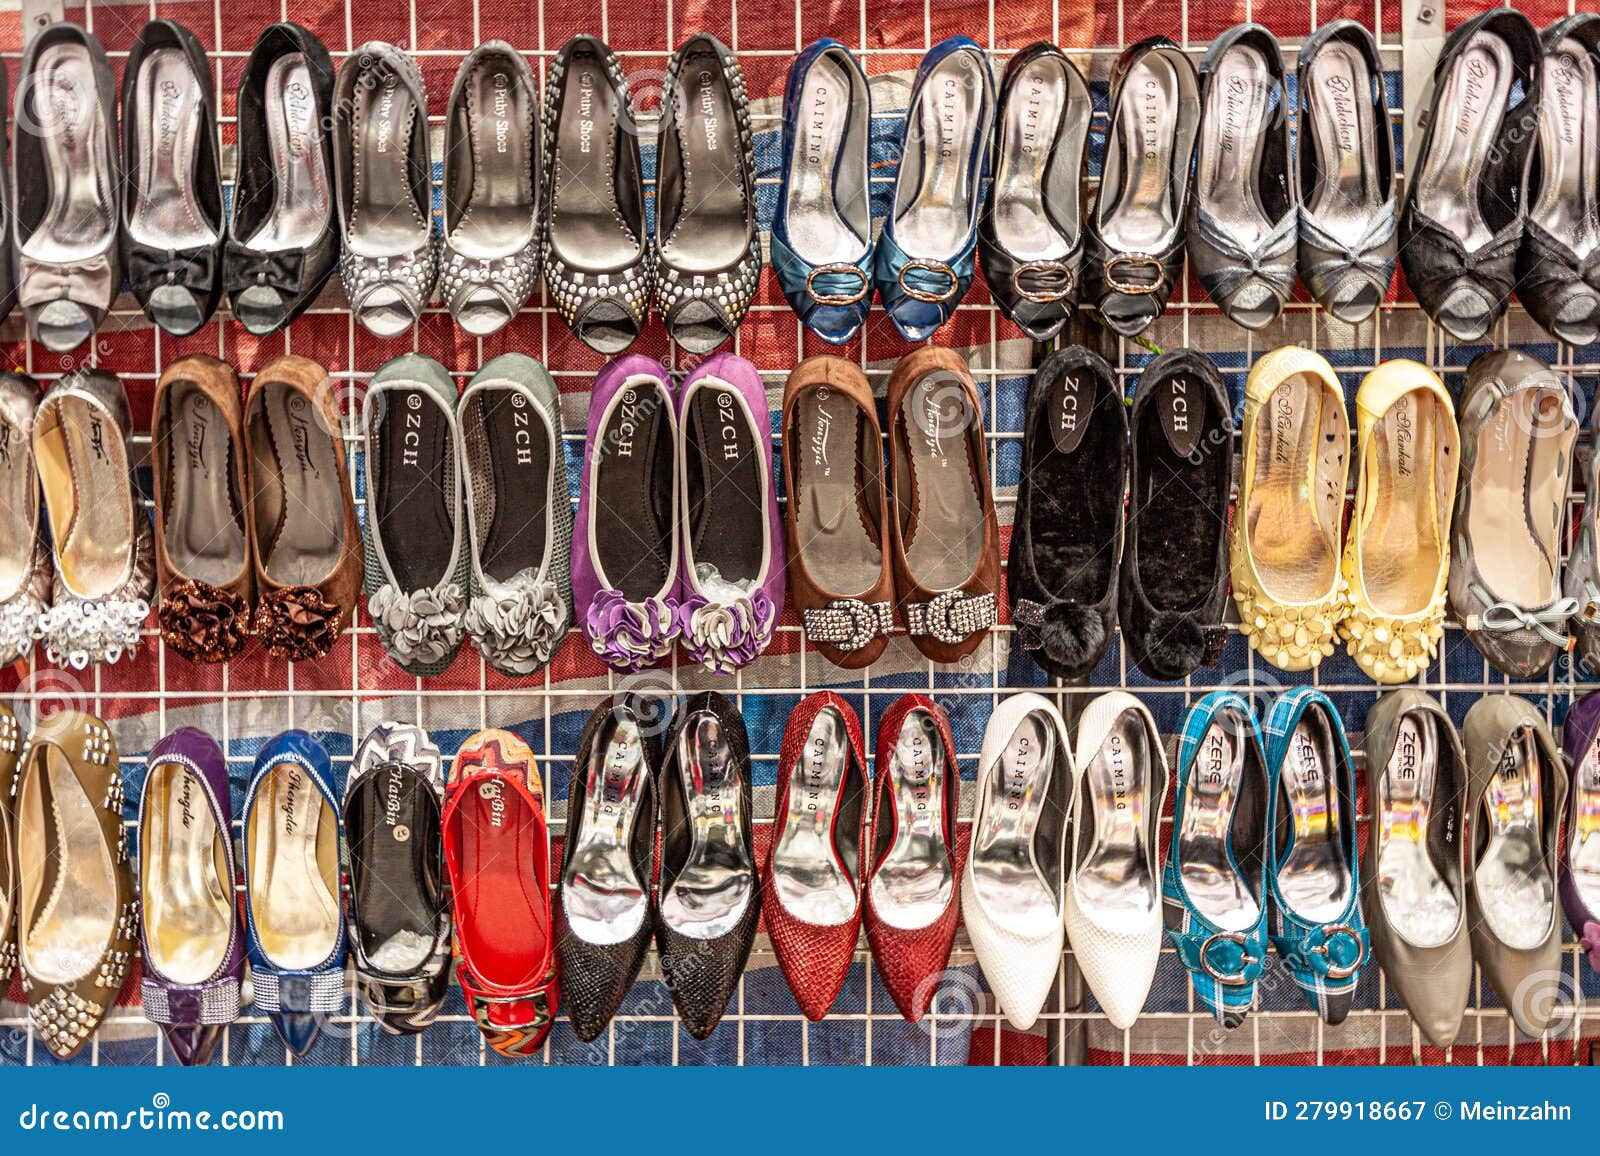 Shoes sale in bangkok market hi-res stock photography and images - Alamy